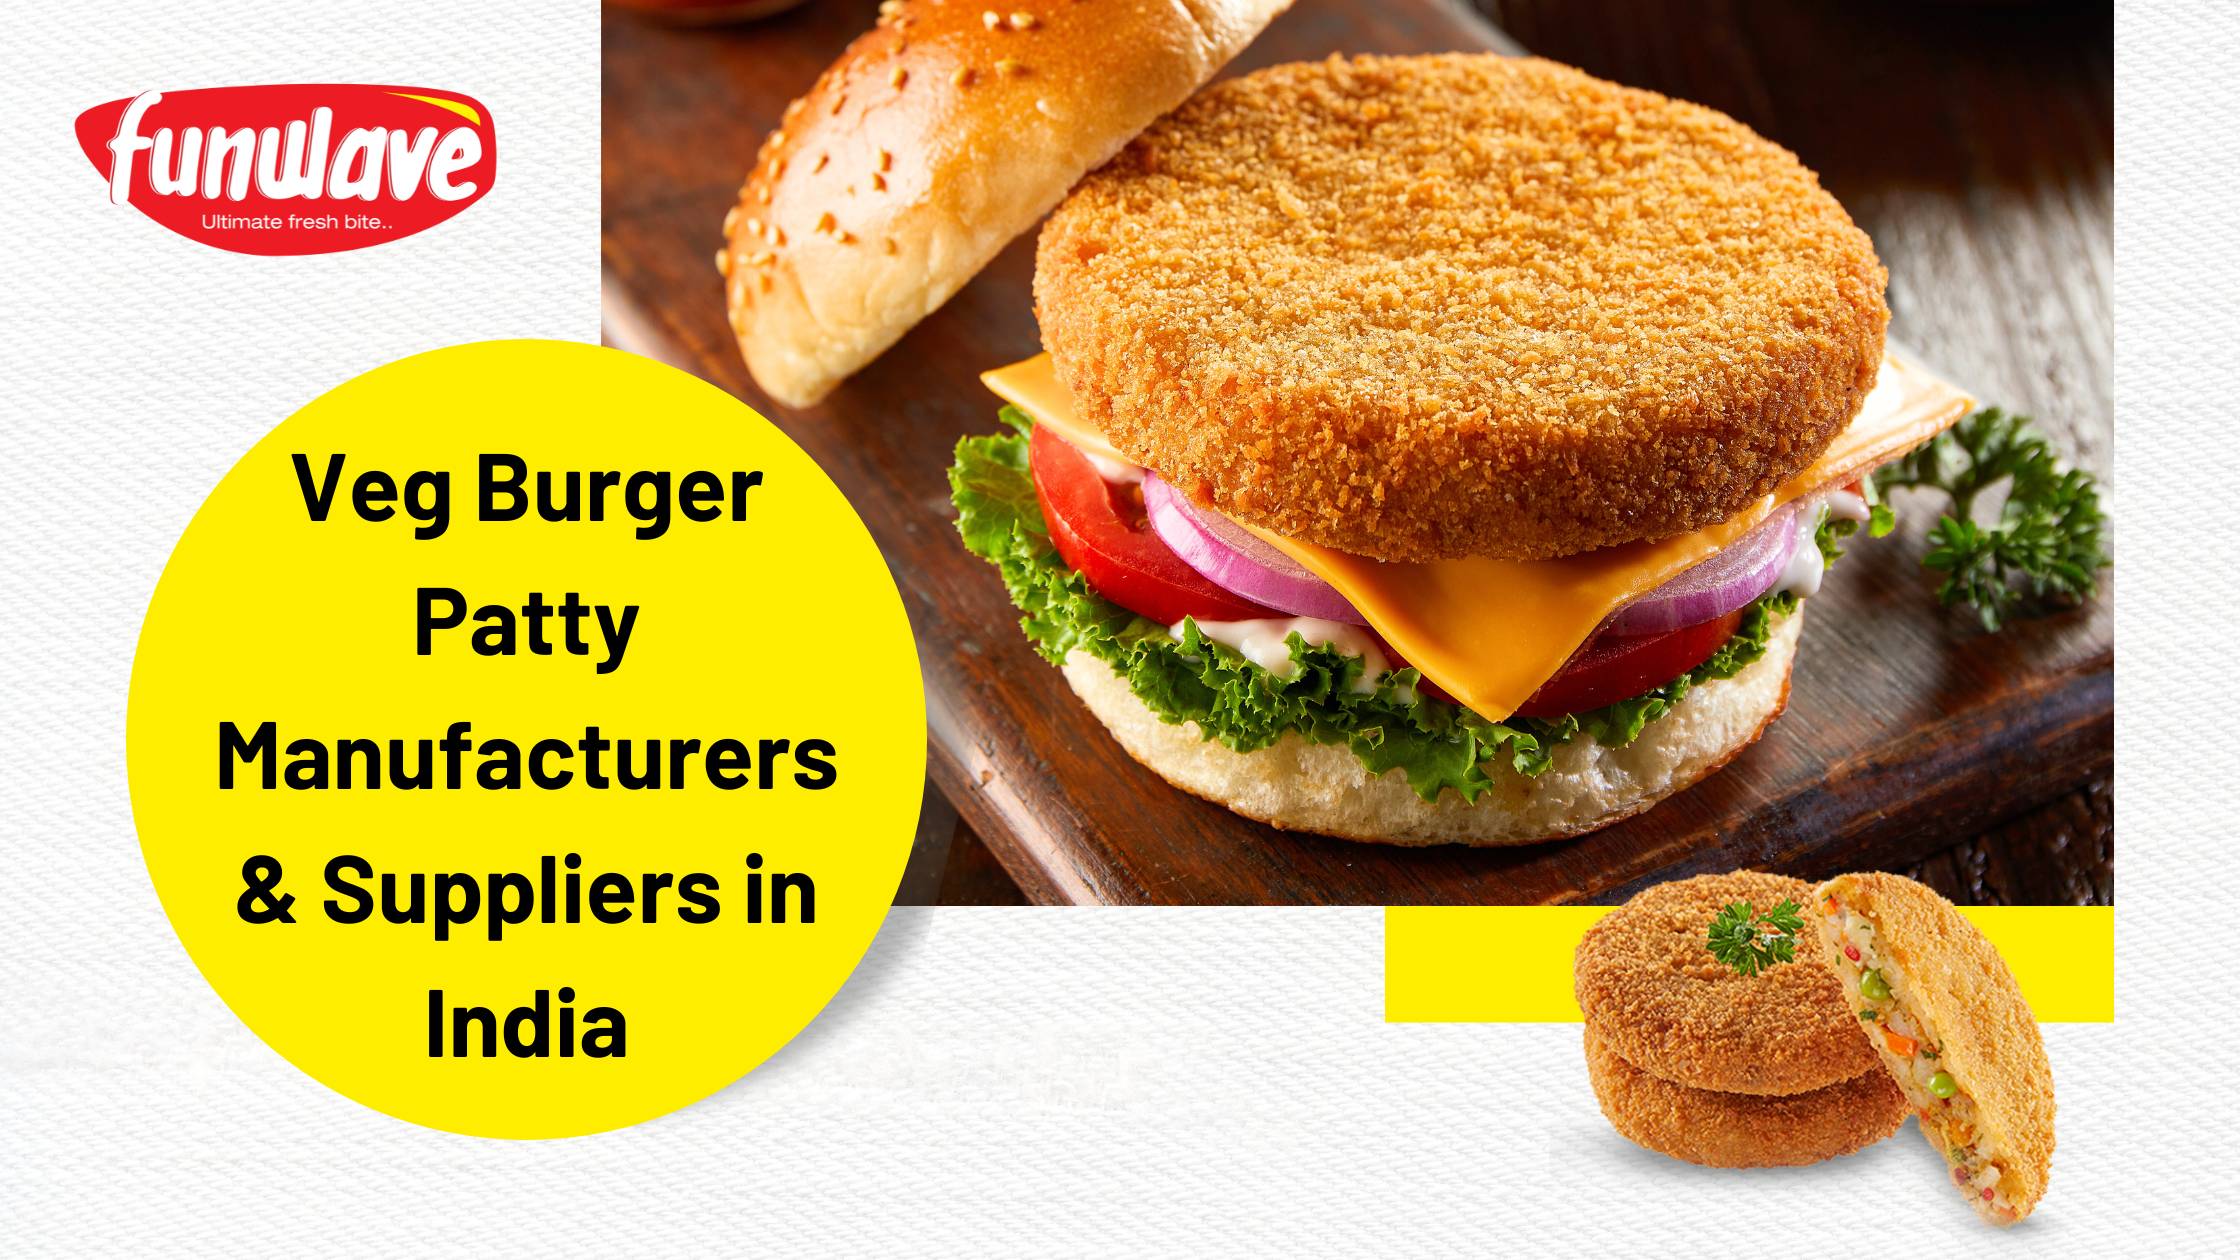 Veg Burger Patty Manufacturers & Suppliers in India